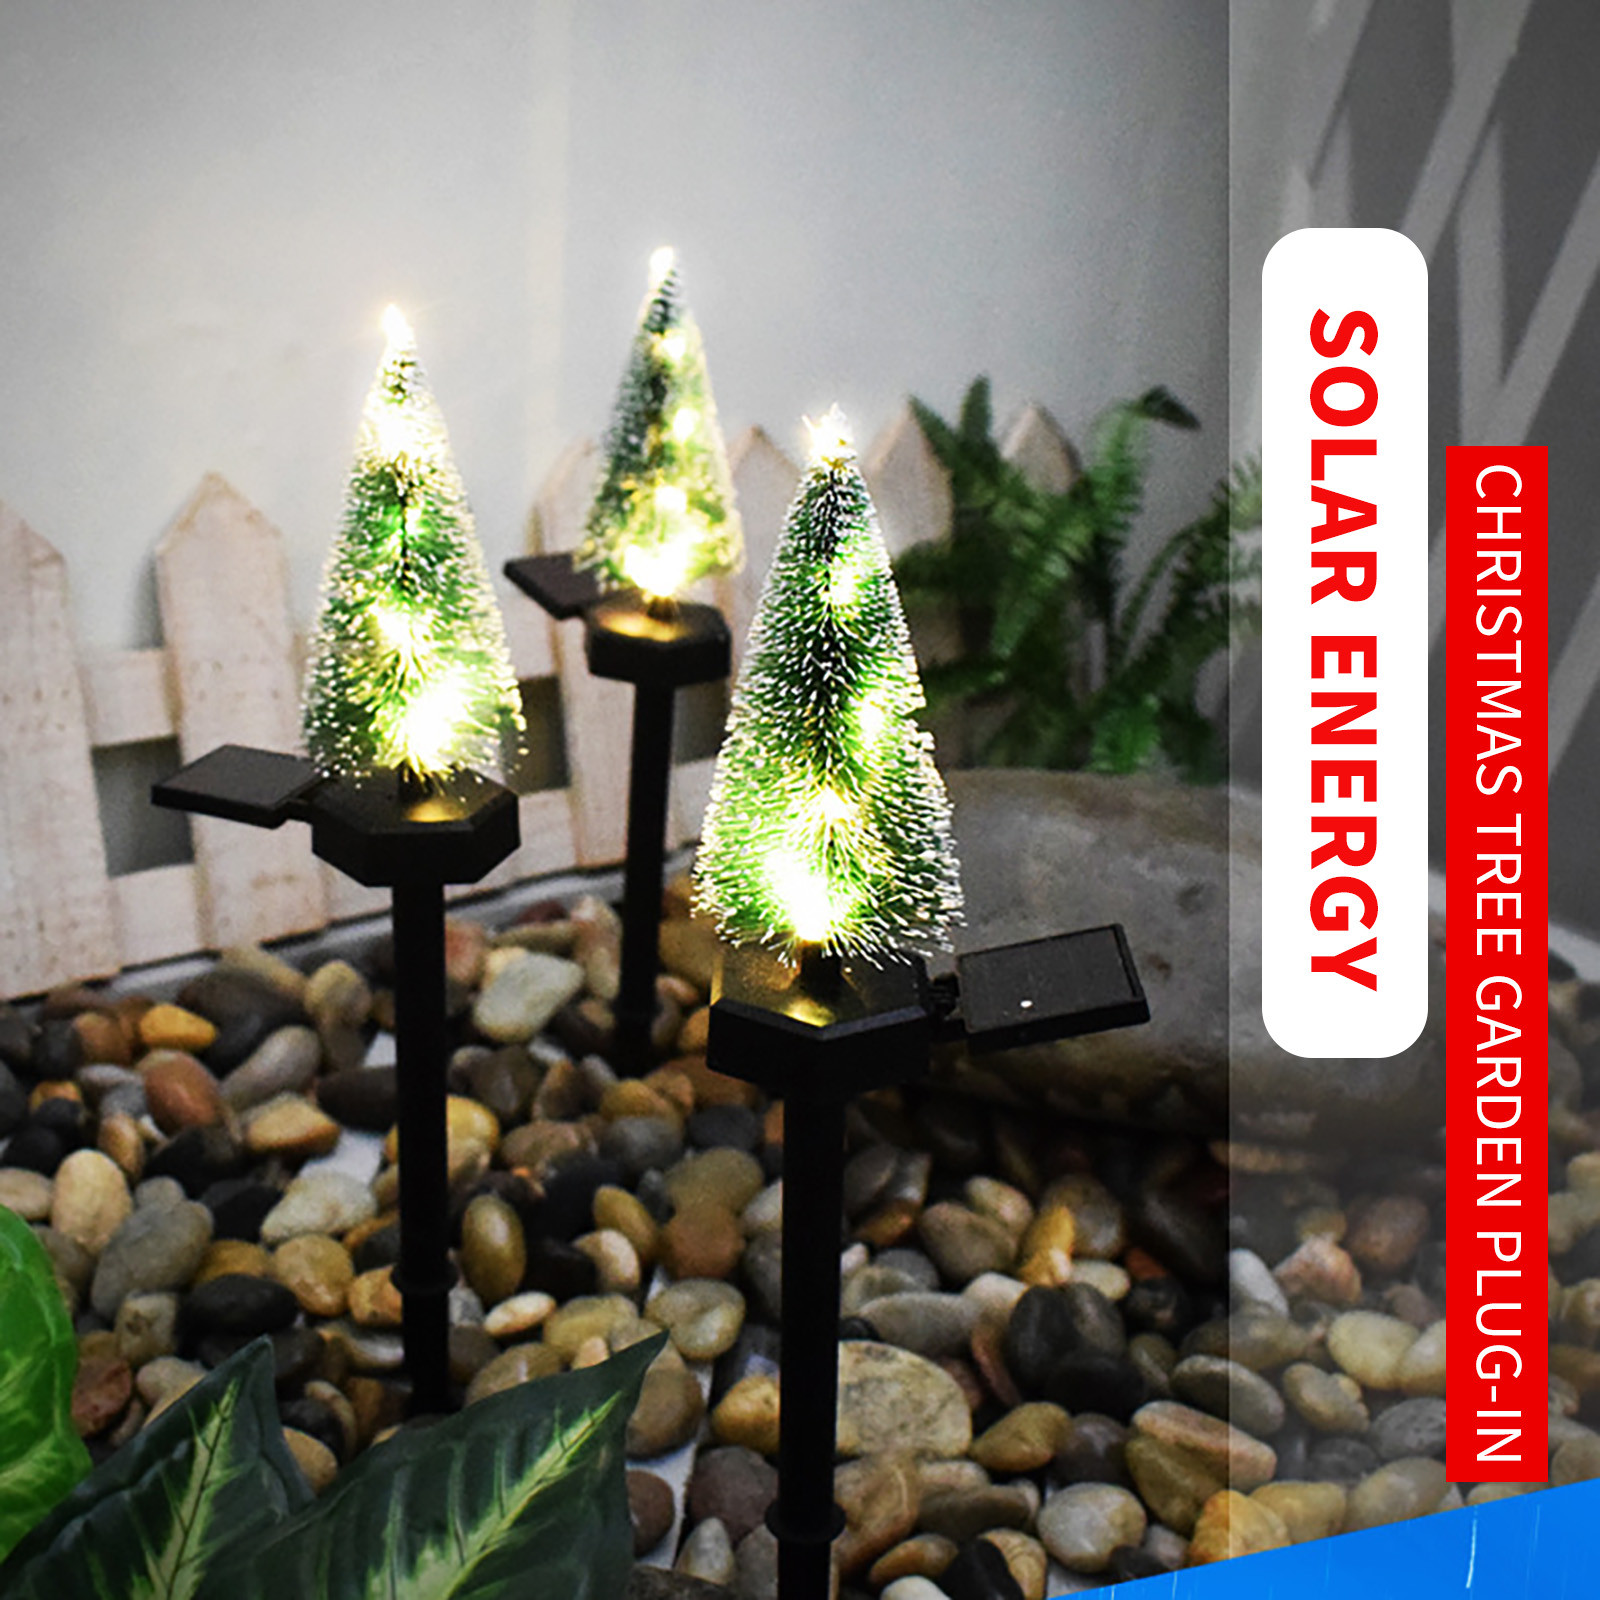 Christmas-Tree-Lights-Led-Solar-Light-For-Garden-Decoration-Lawn-Lamp-Outdoor-Home-Pathway-Bulb-Wate-1918433-2